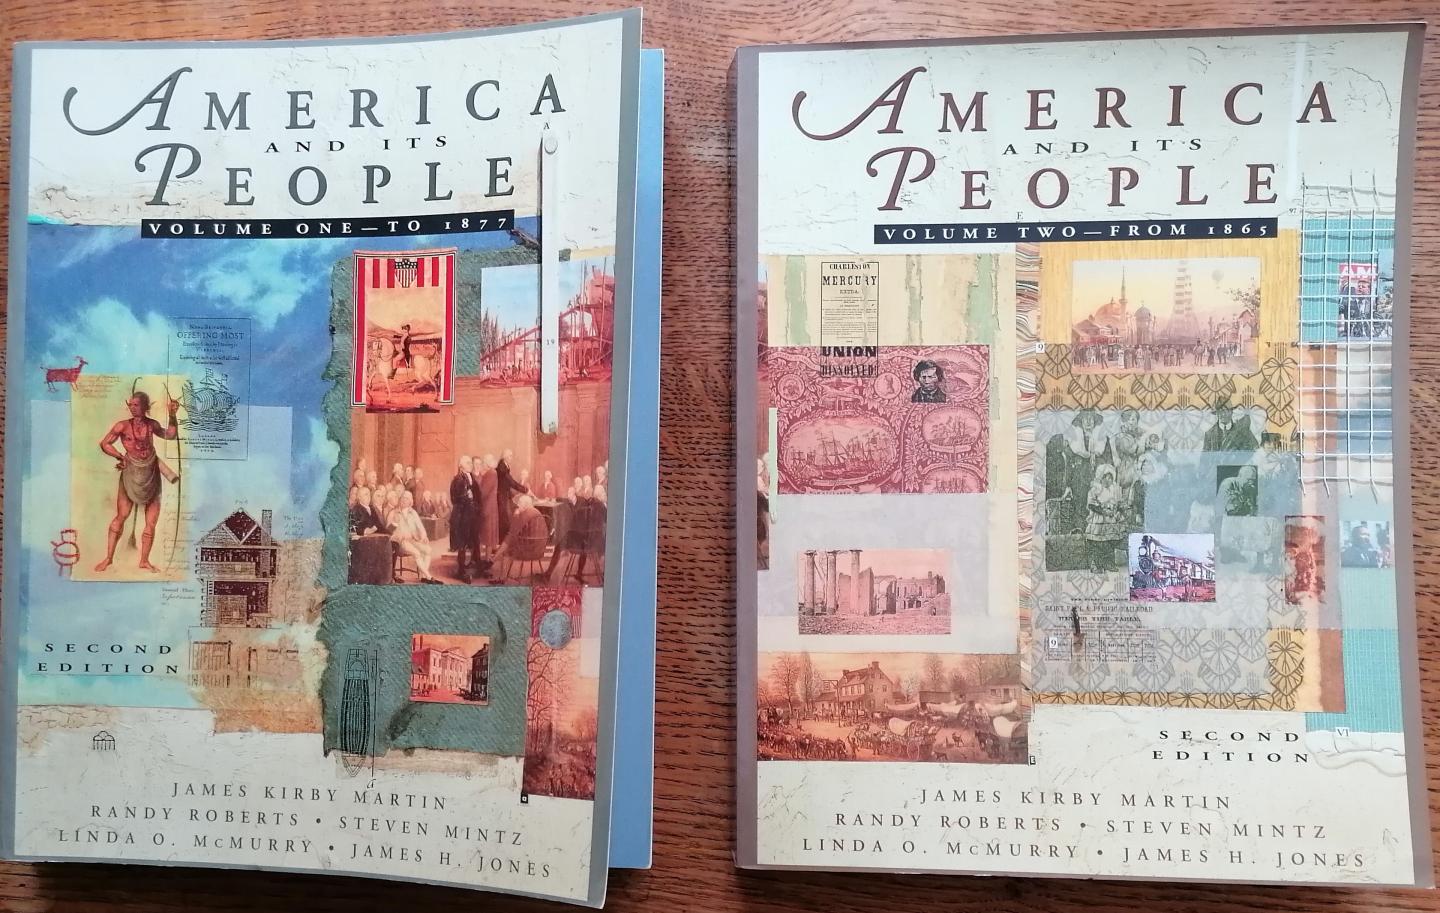 Kirby Martin, James; Randy Roberts; Steven Mintz; Linda O. McMurry; James H. Jones - America and its people 2 dln. compl. Second edition.